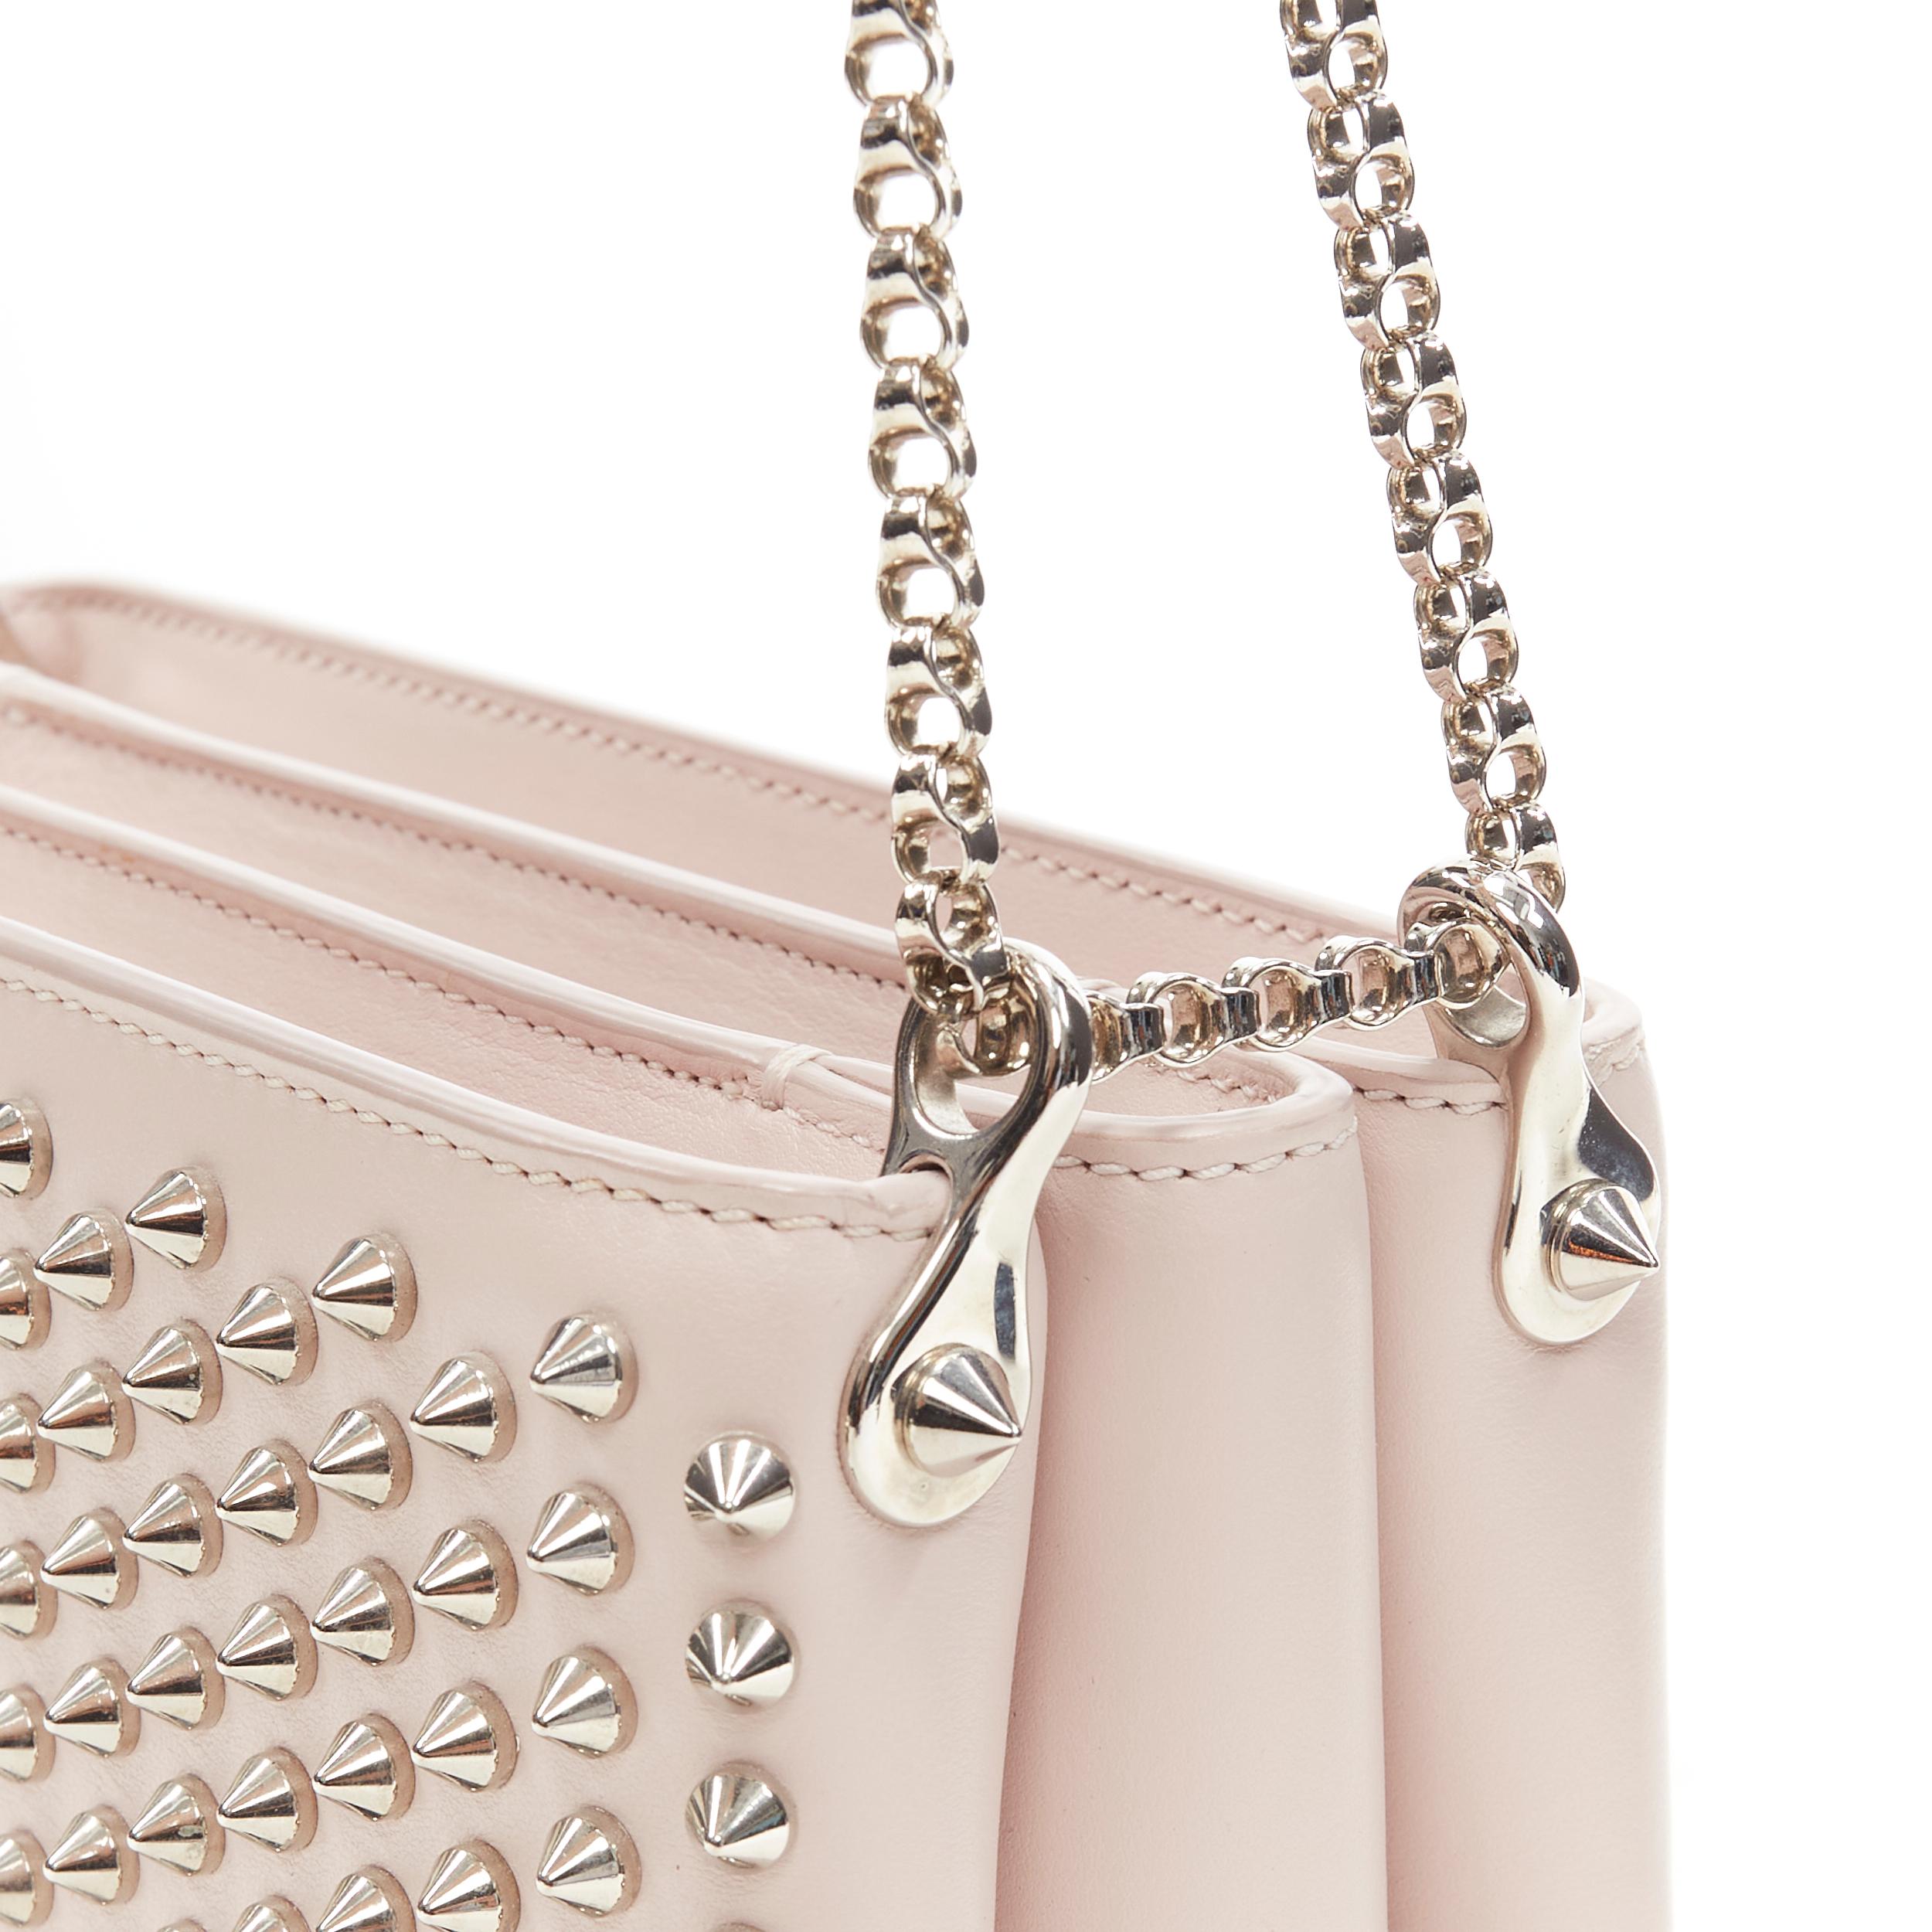 CHRISTIAN LOUBOUTIN Triloubi studded trio gusset shoulder chain crossbody bag In Excellent Condition For Sale In Hong Kong, NT